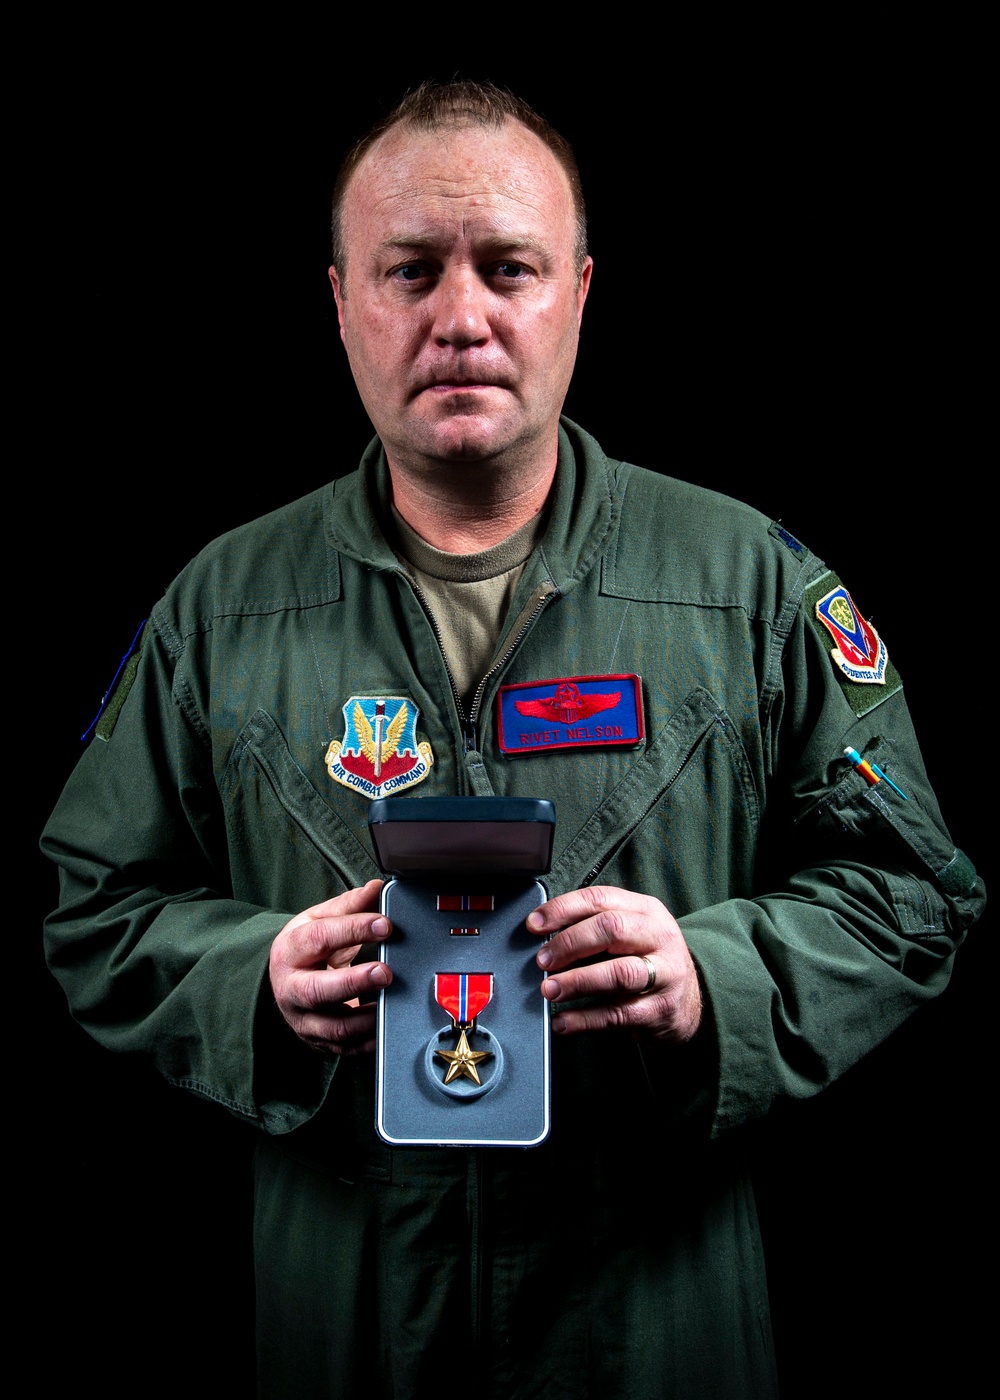 366th FW chief of safety wins Bronze Star